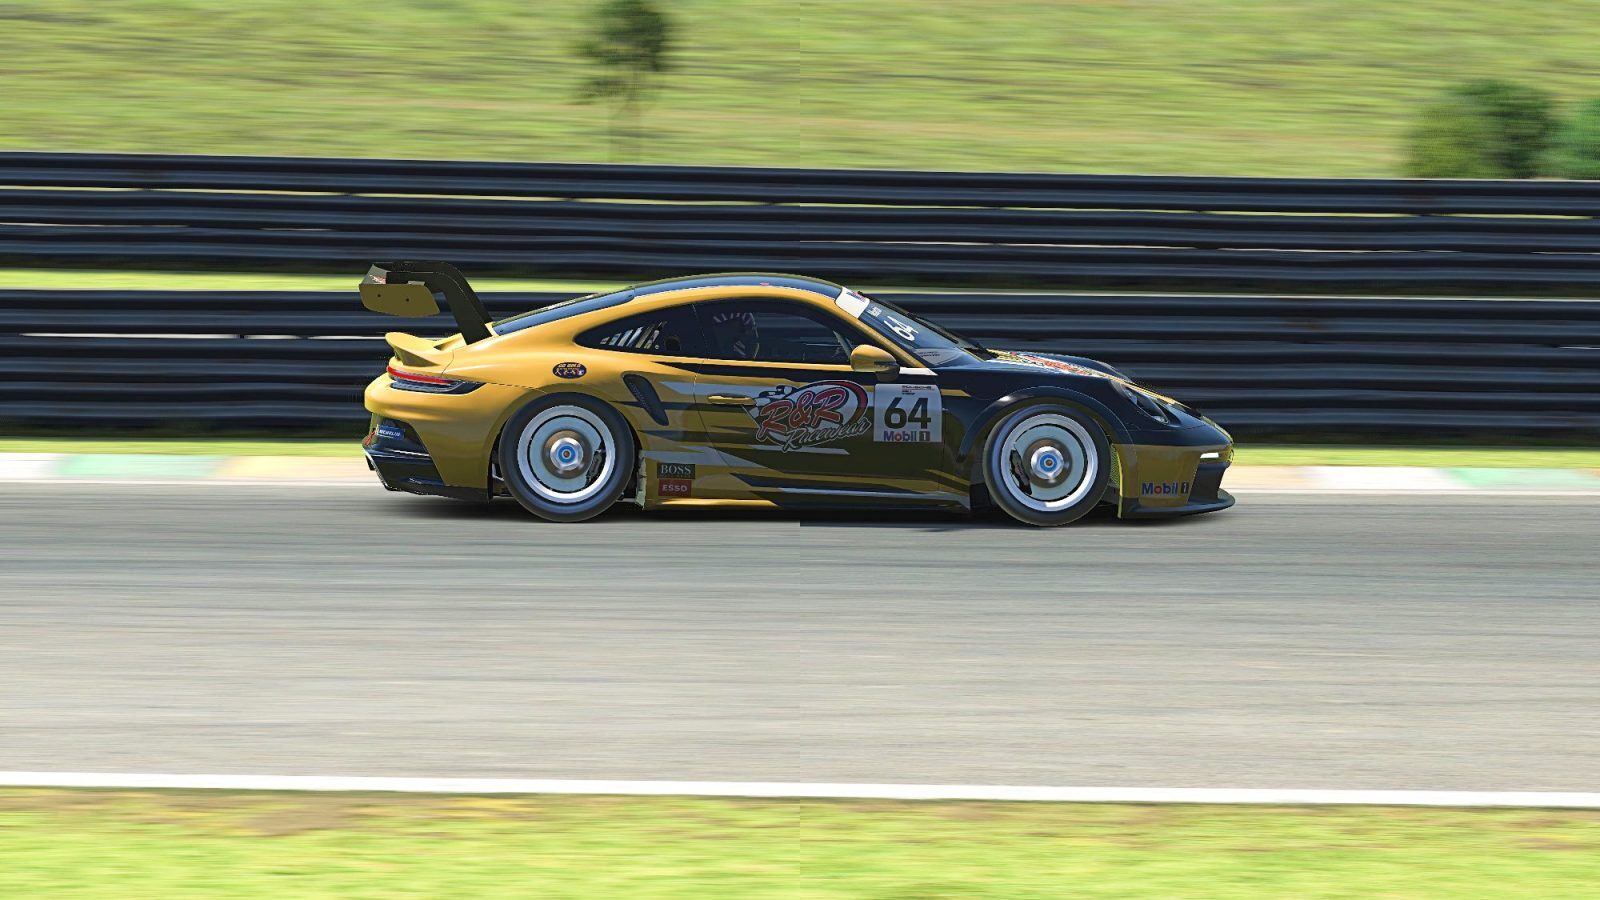 An image of a Porsche GT3 Cup Car in iRacing.